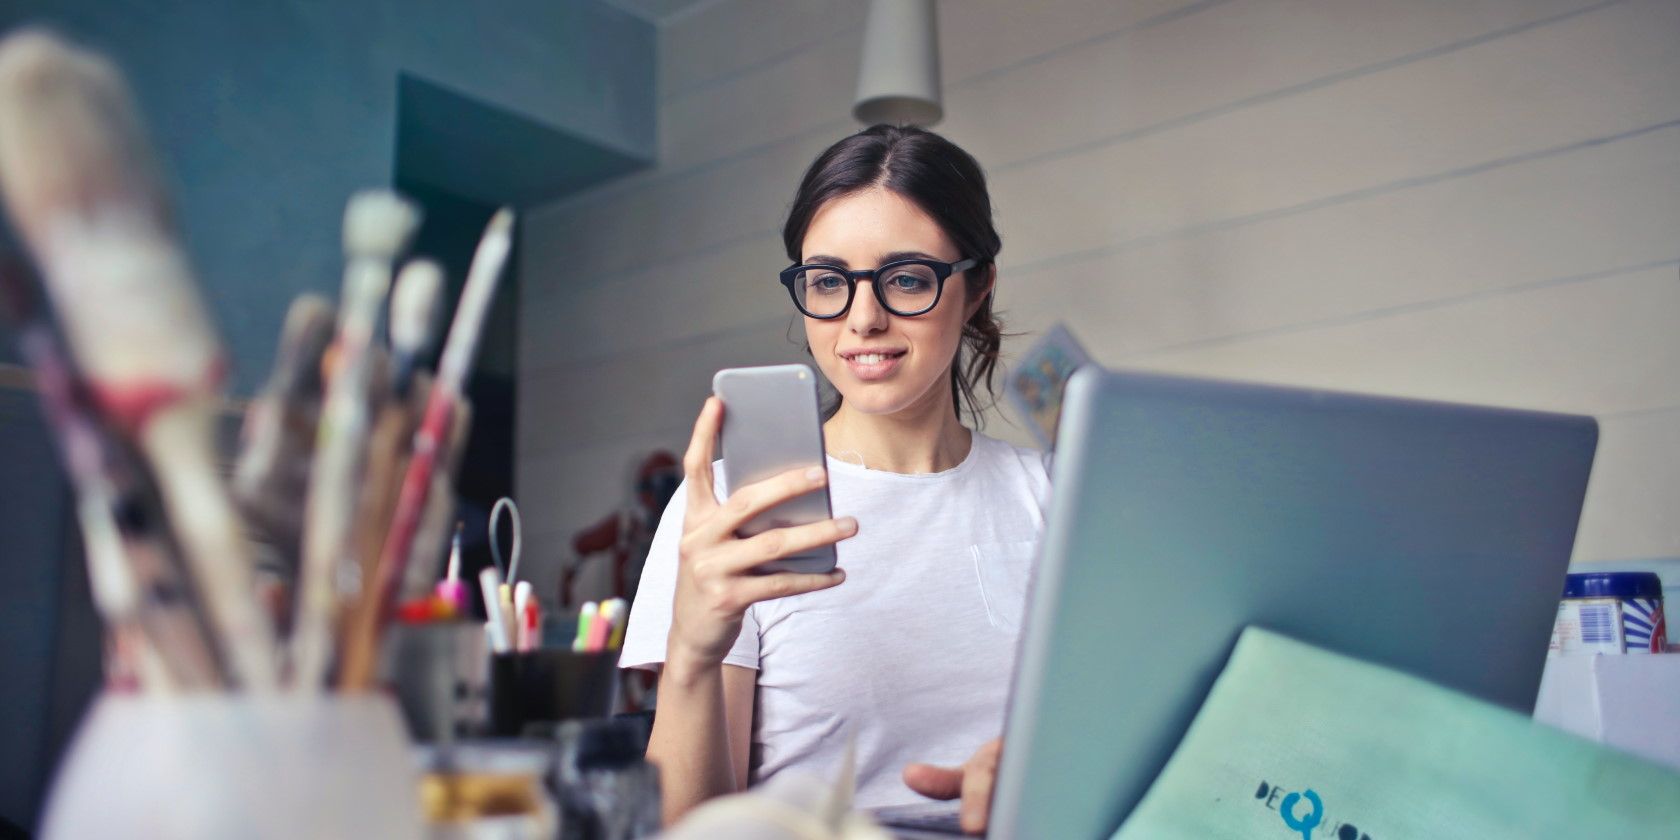 Woman smiling and holding smartphone in office environment